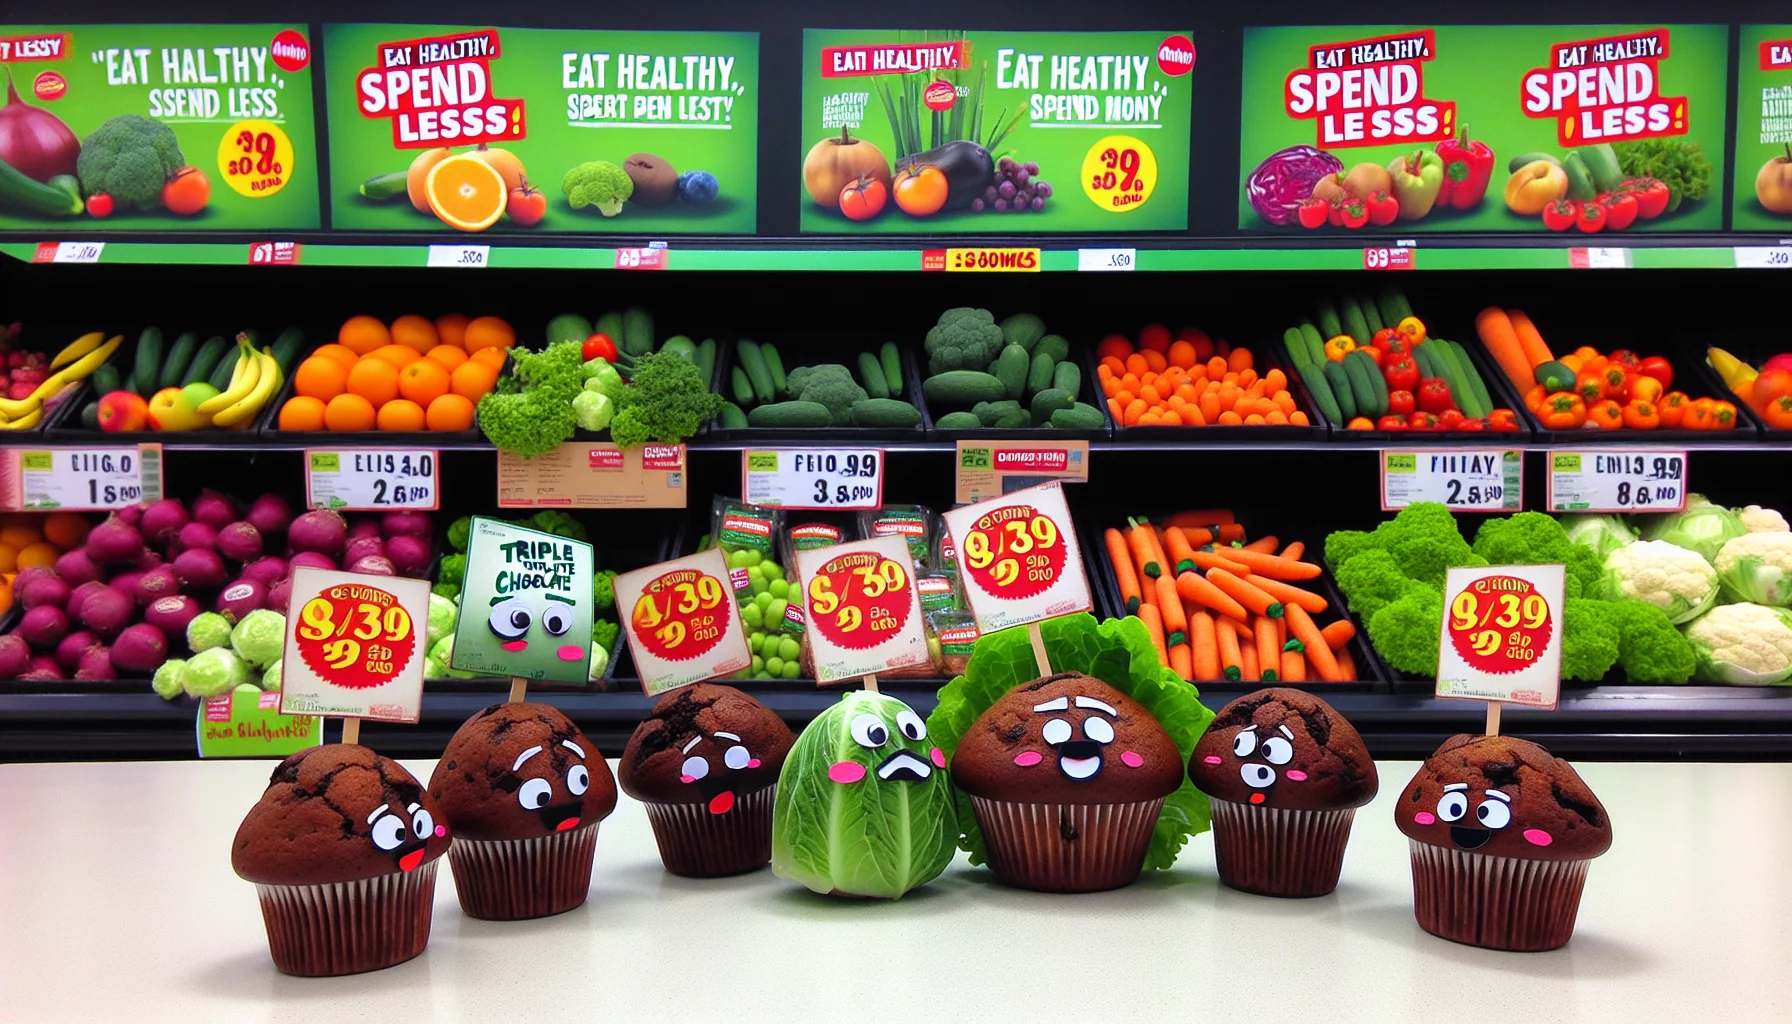 Generate an image where a group of juicy Triple Chocolate Muffins are participating in a humorous skit. This unusual scene is set in a healthy, affordable supermarket aisle surrounded by fresh fruits and vegetables. The muffins, each with faces drawn on them, are mock bickering over who is the tastiest, with tiny placards saying 'Eat Healthy, Spend Less'. The others are wearing miniature lettuce, carrot, and beetroot costumes. The backdrop features bright, colorful posters advertising discount deals on organic produce, strengthening the enticing message of eating healthily for less money.